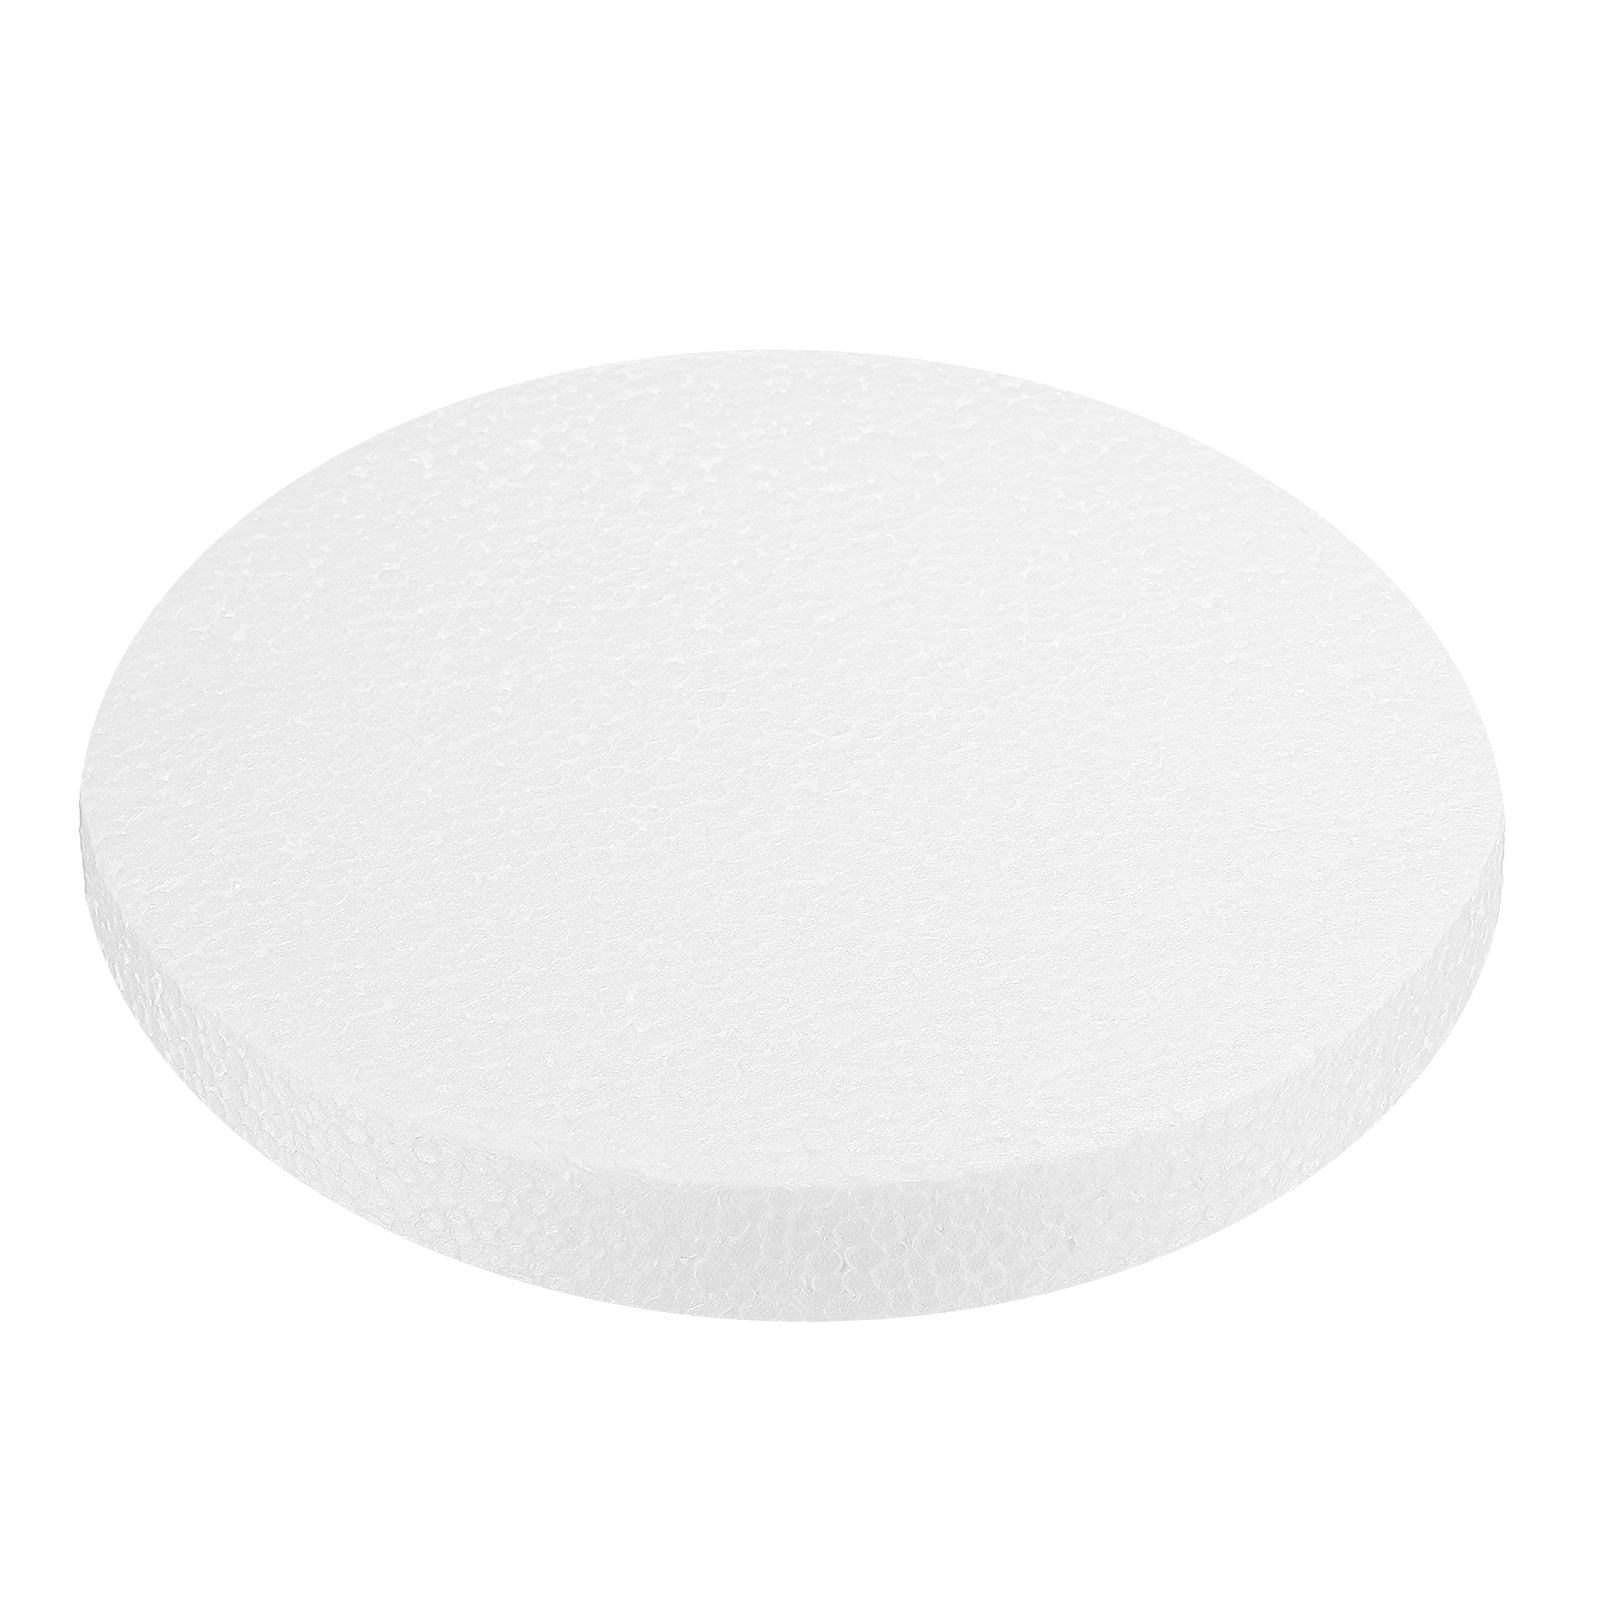 16 Piece Foam Circles for Crafts, Round Foam Circles Polystyrene Round Foam  Disc Round Foam Cake for Arts and Crafts Supplies